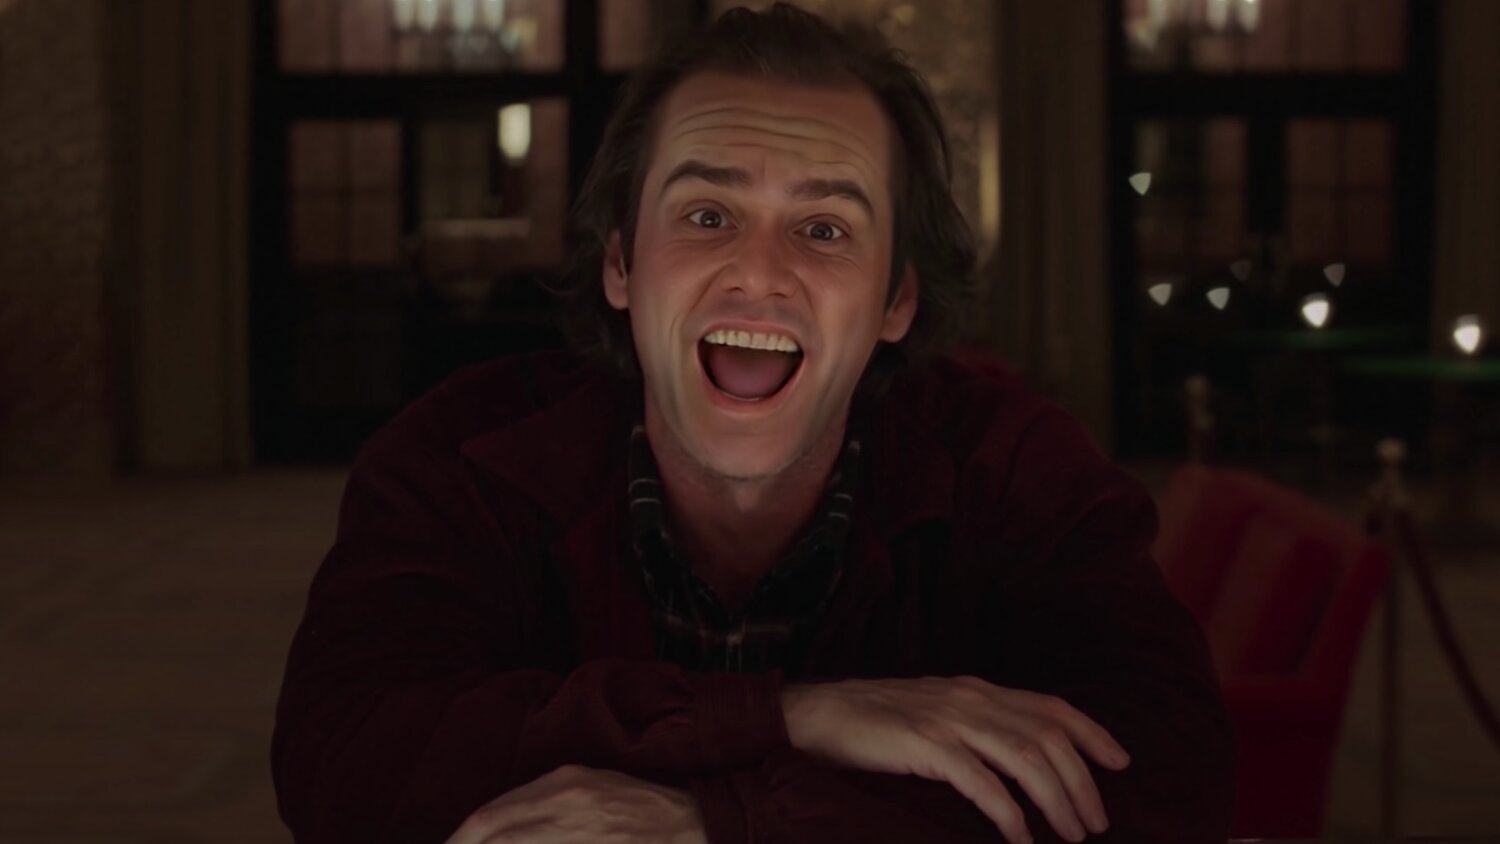 Jim Carrey replaced Jack Nicholson in the movie